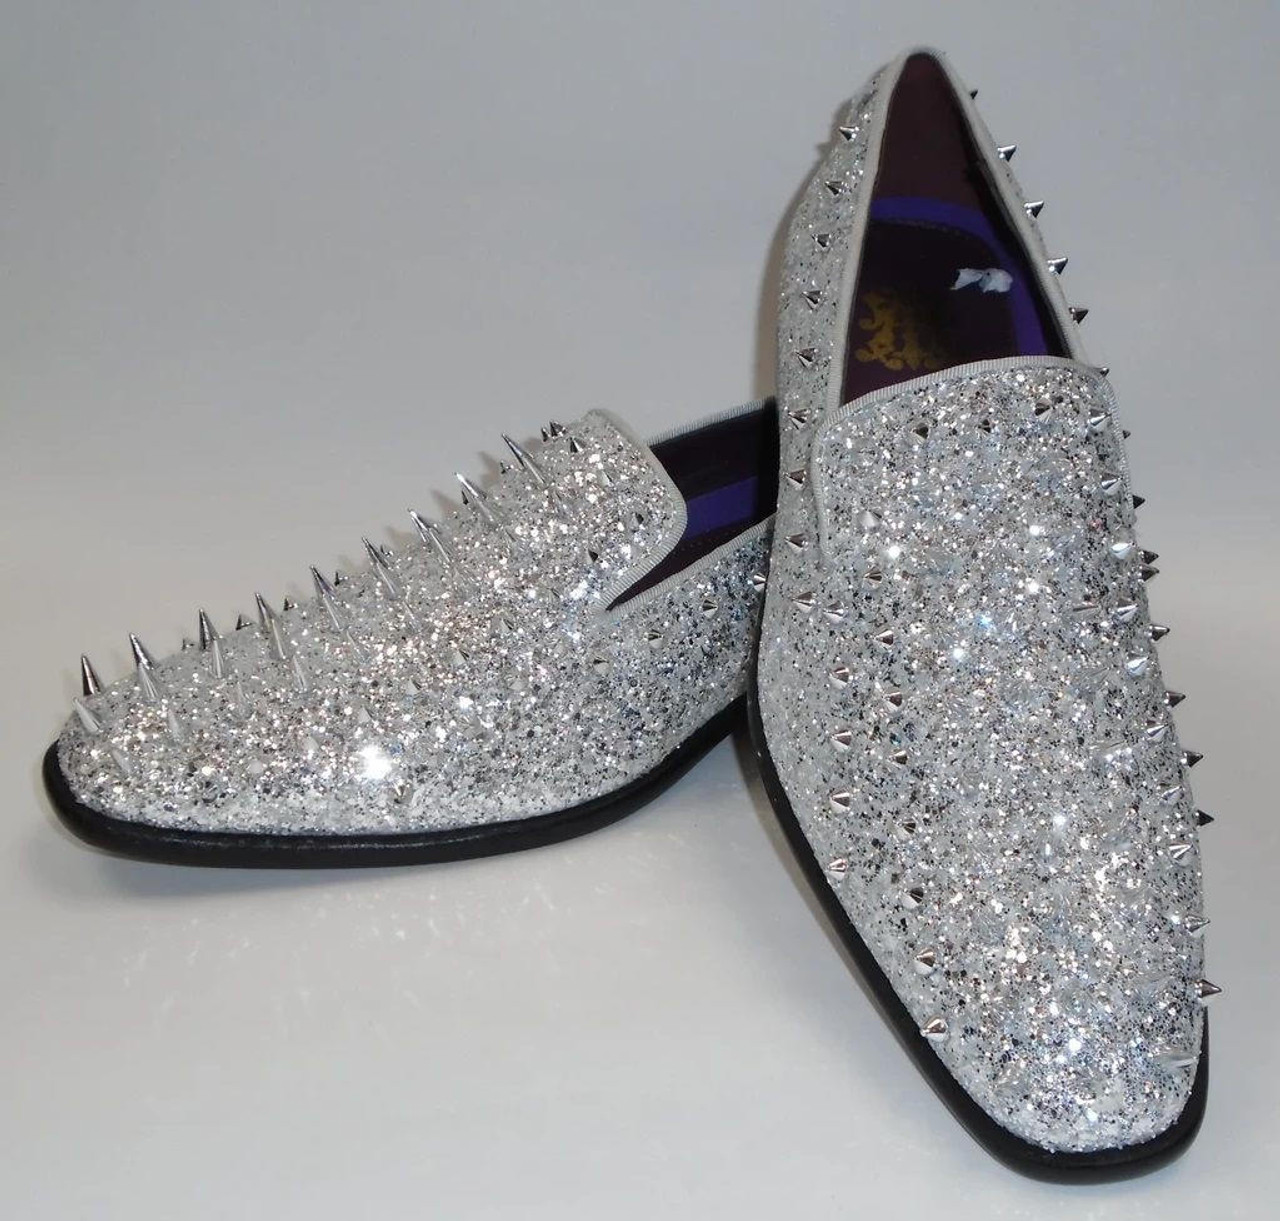 Mens Spiked Dress Shoes Formal Silver Prom Homecoming Loafer 6788